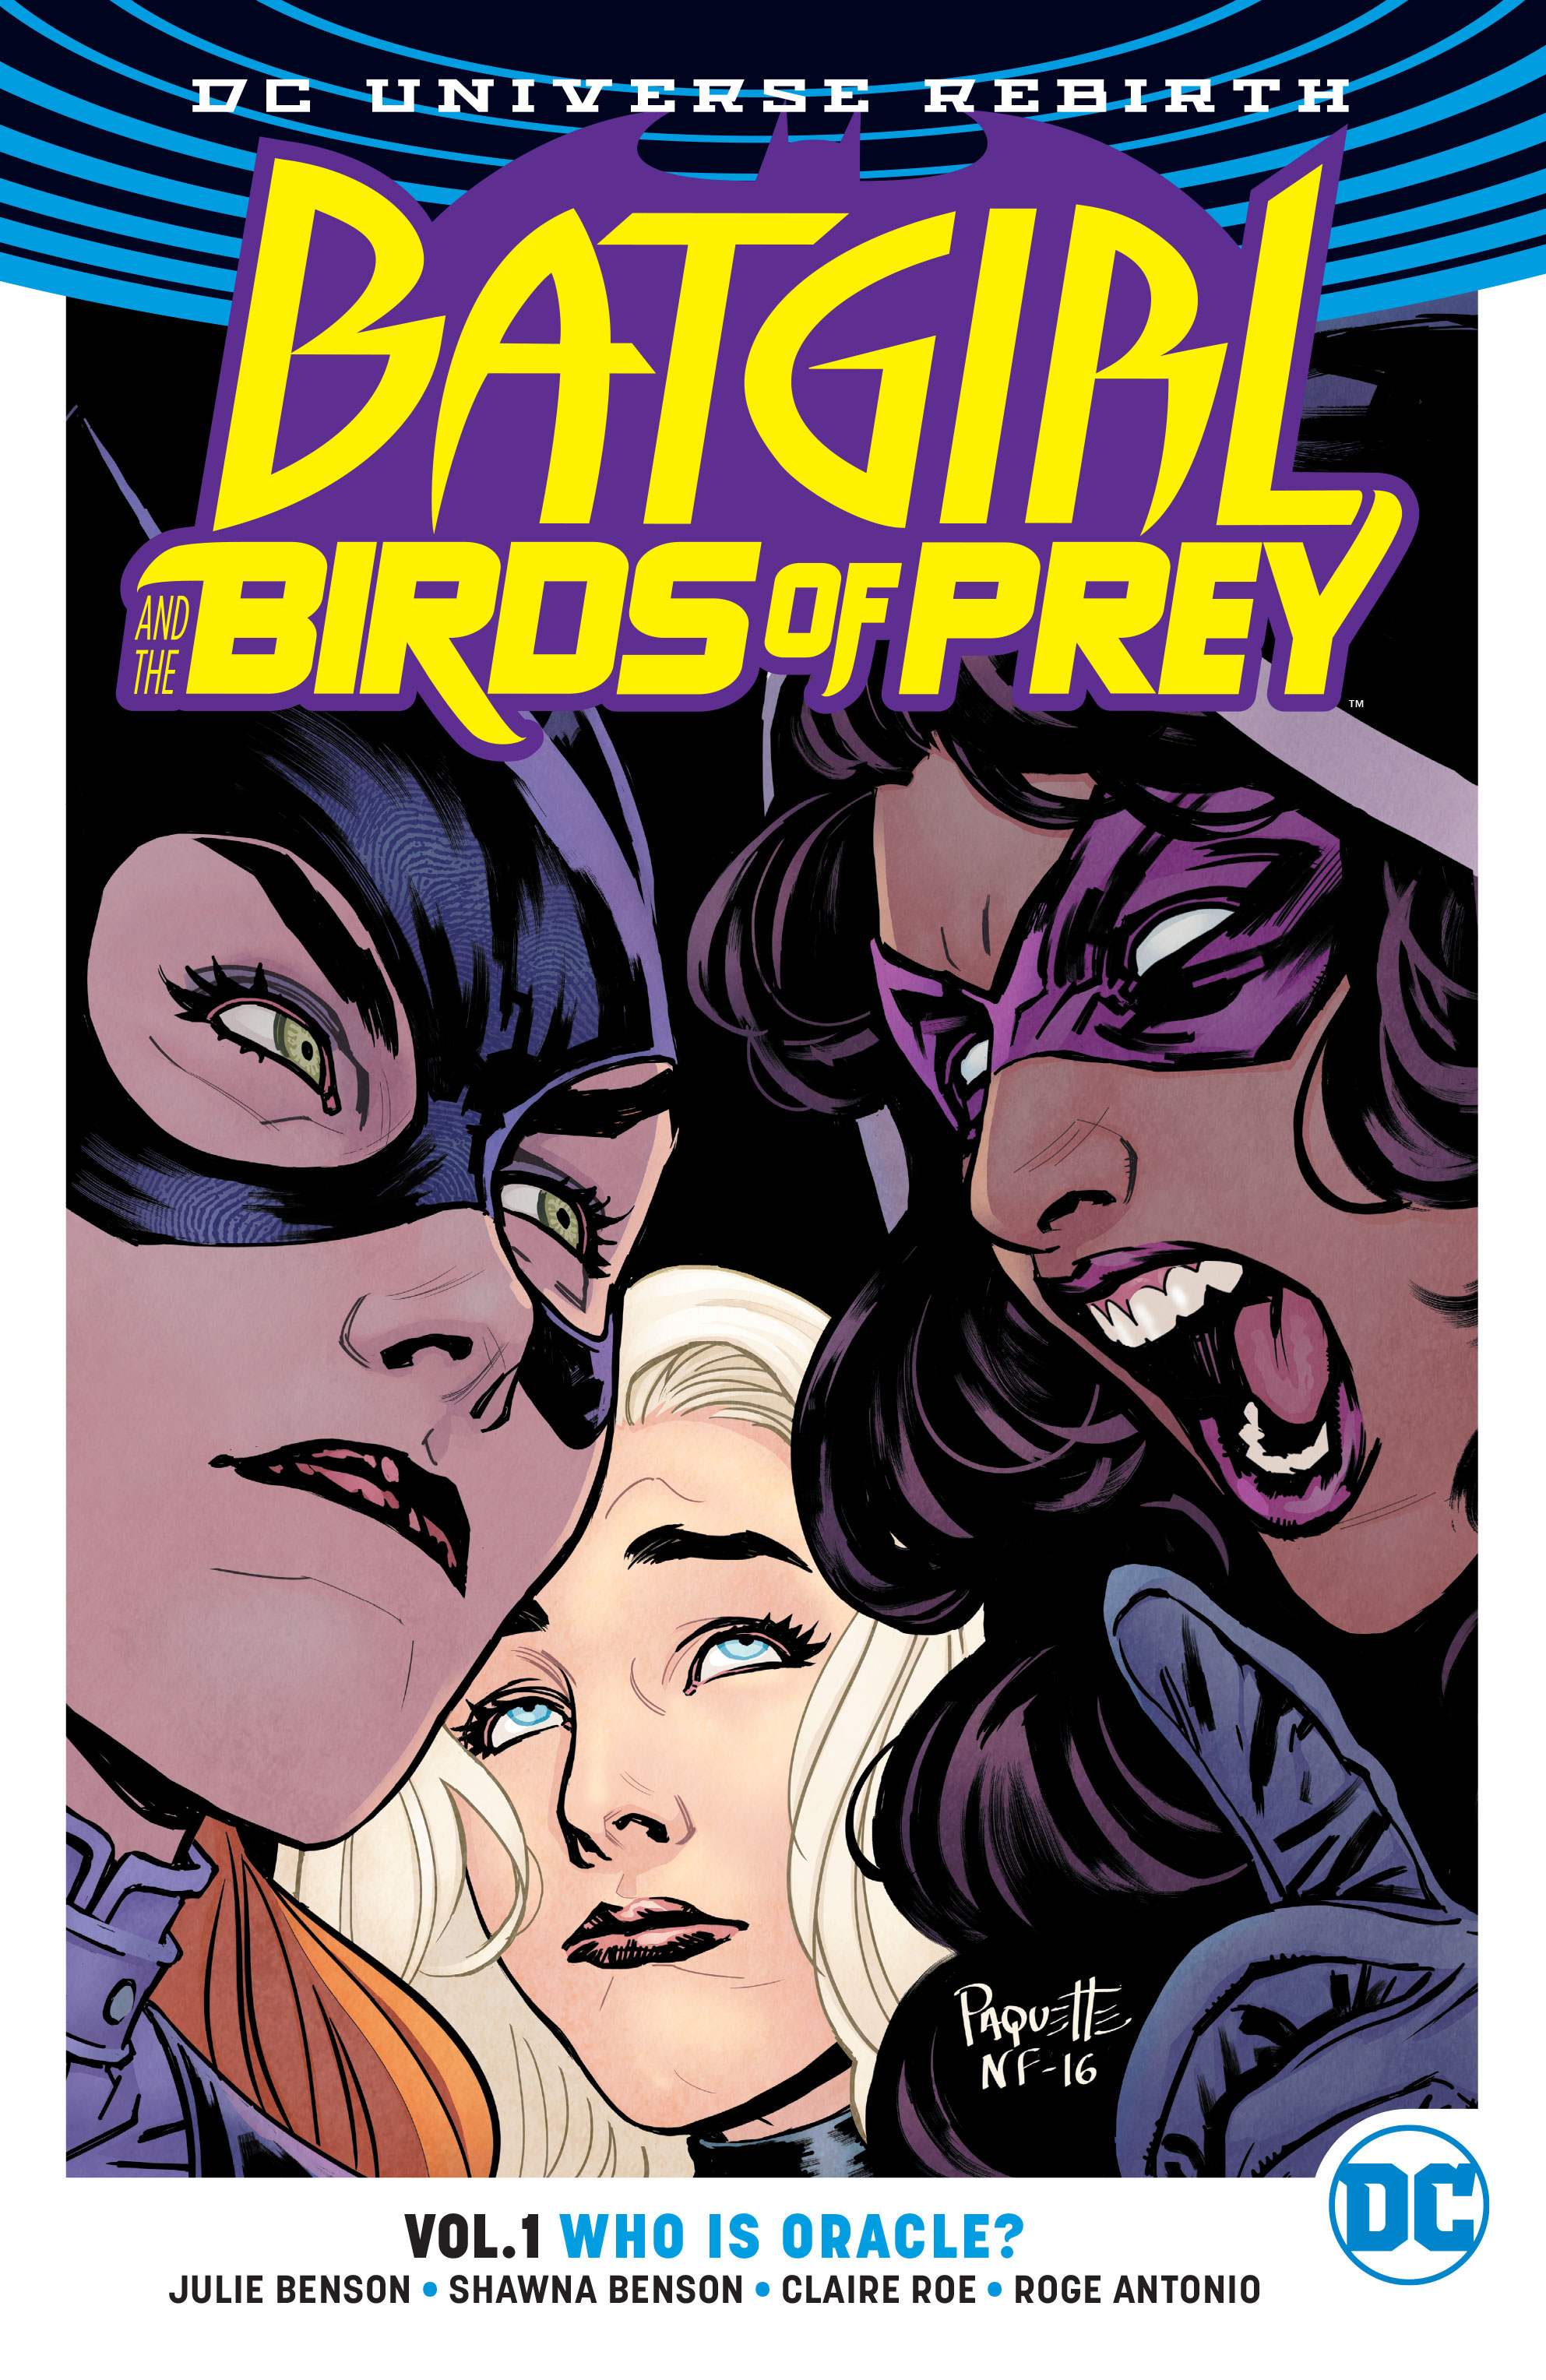 Batgirl and the Birds of Prey Vol. 1: Who Is Oracle? (Rebirth) Review